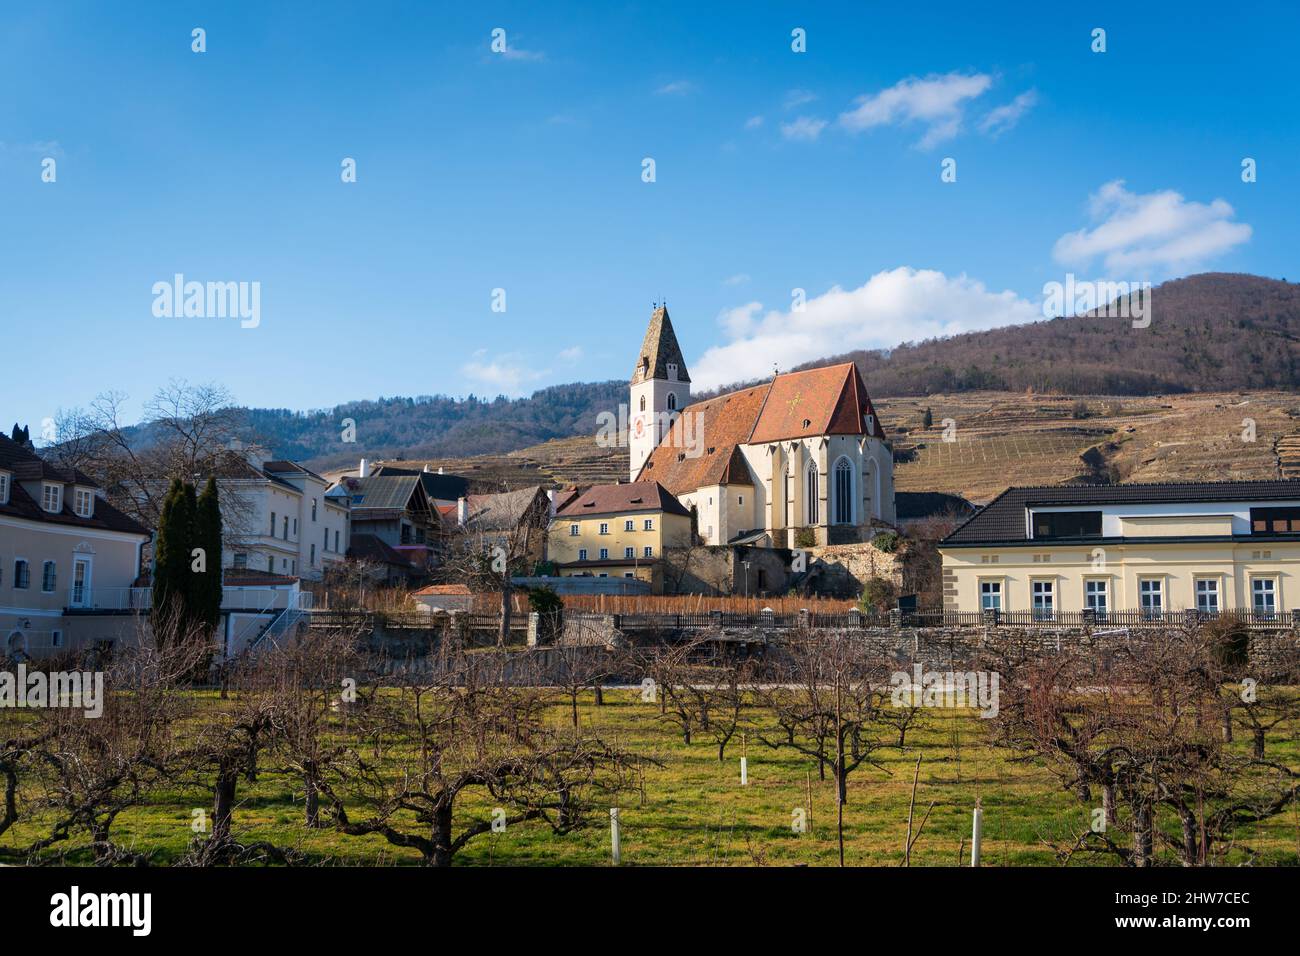 Spitz an der Donau. Famous village and church at the danube river in the Wachau Region of Lower Austria Stock Photo